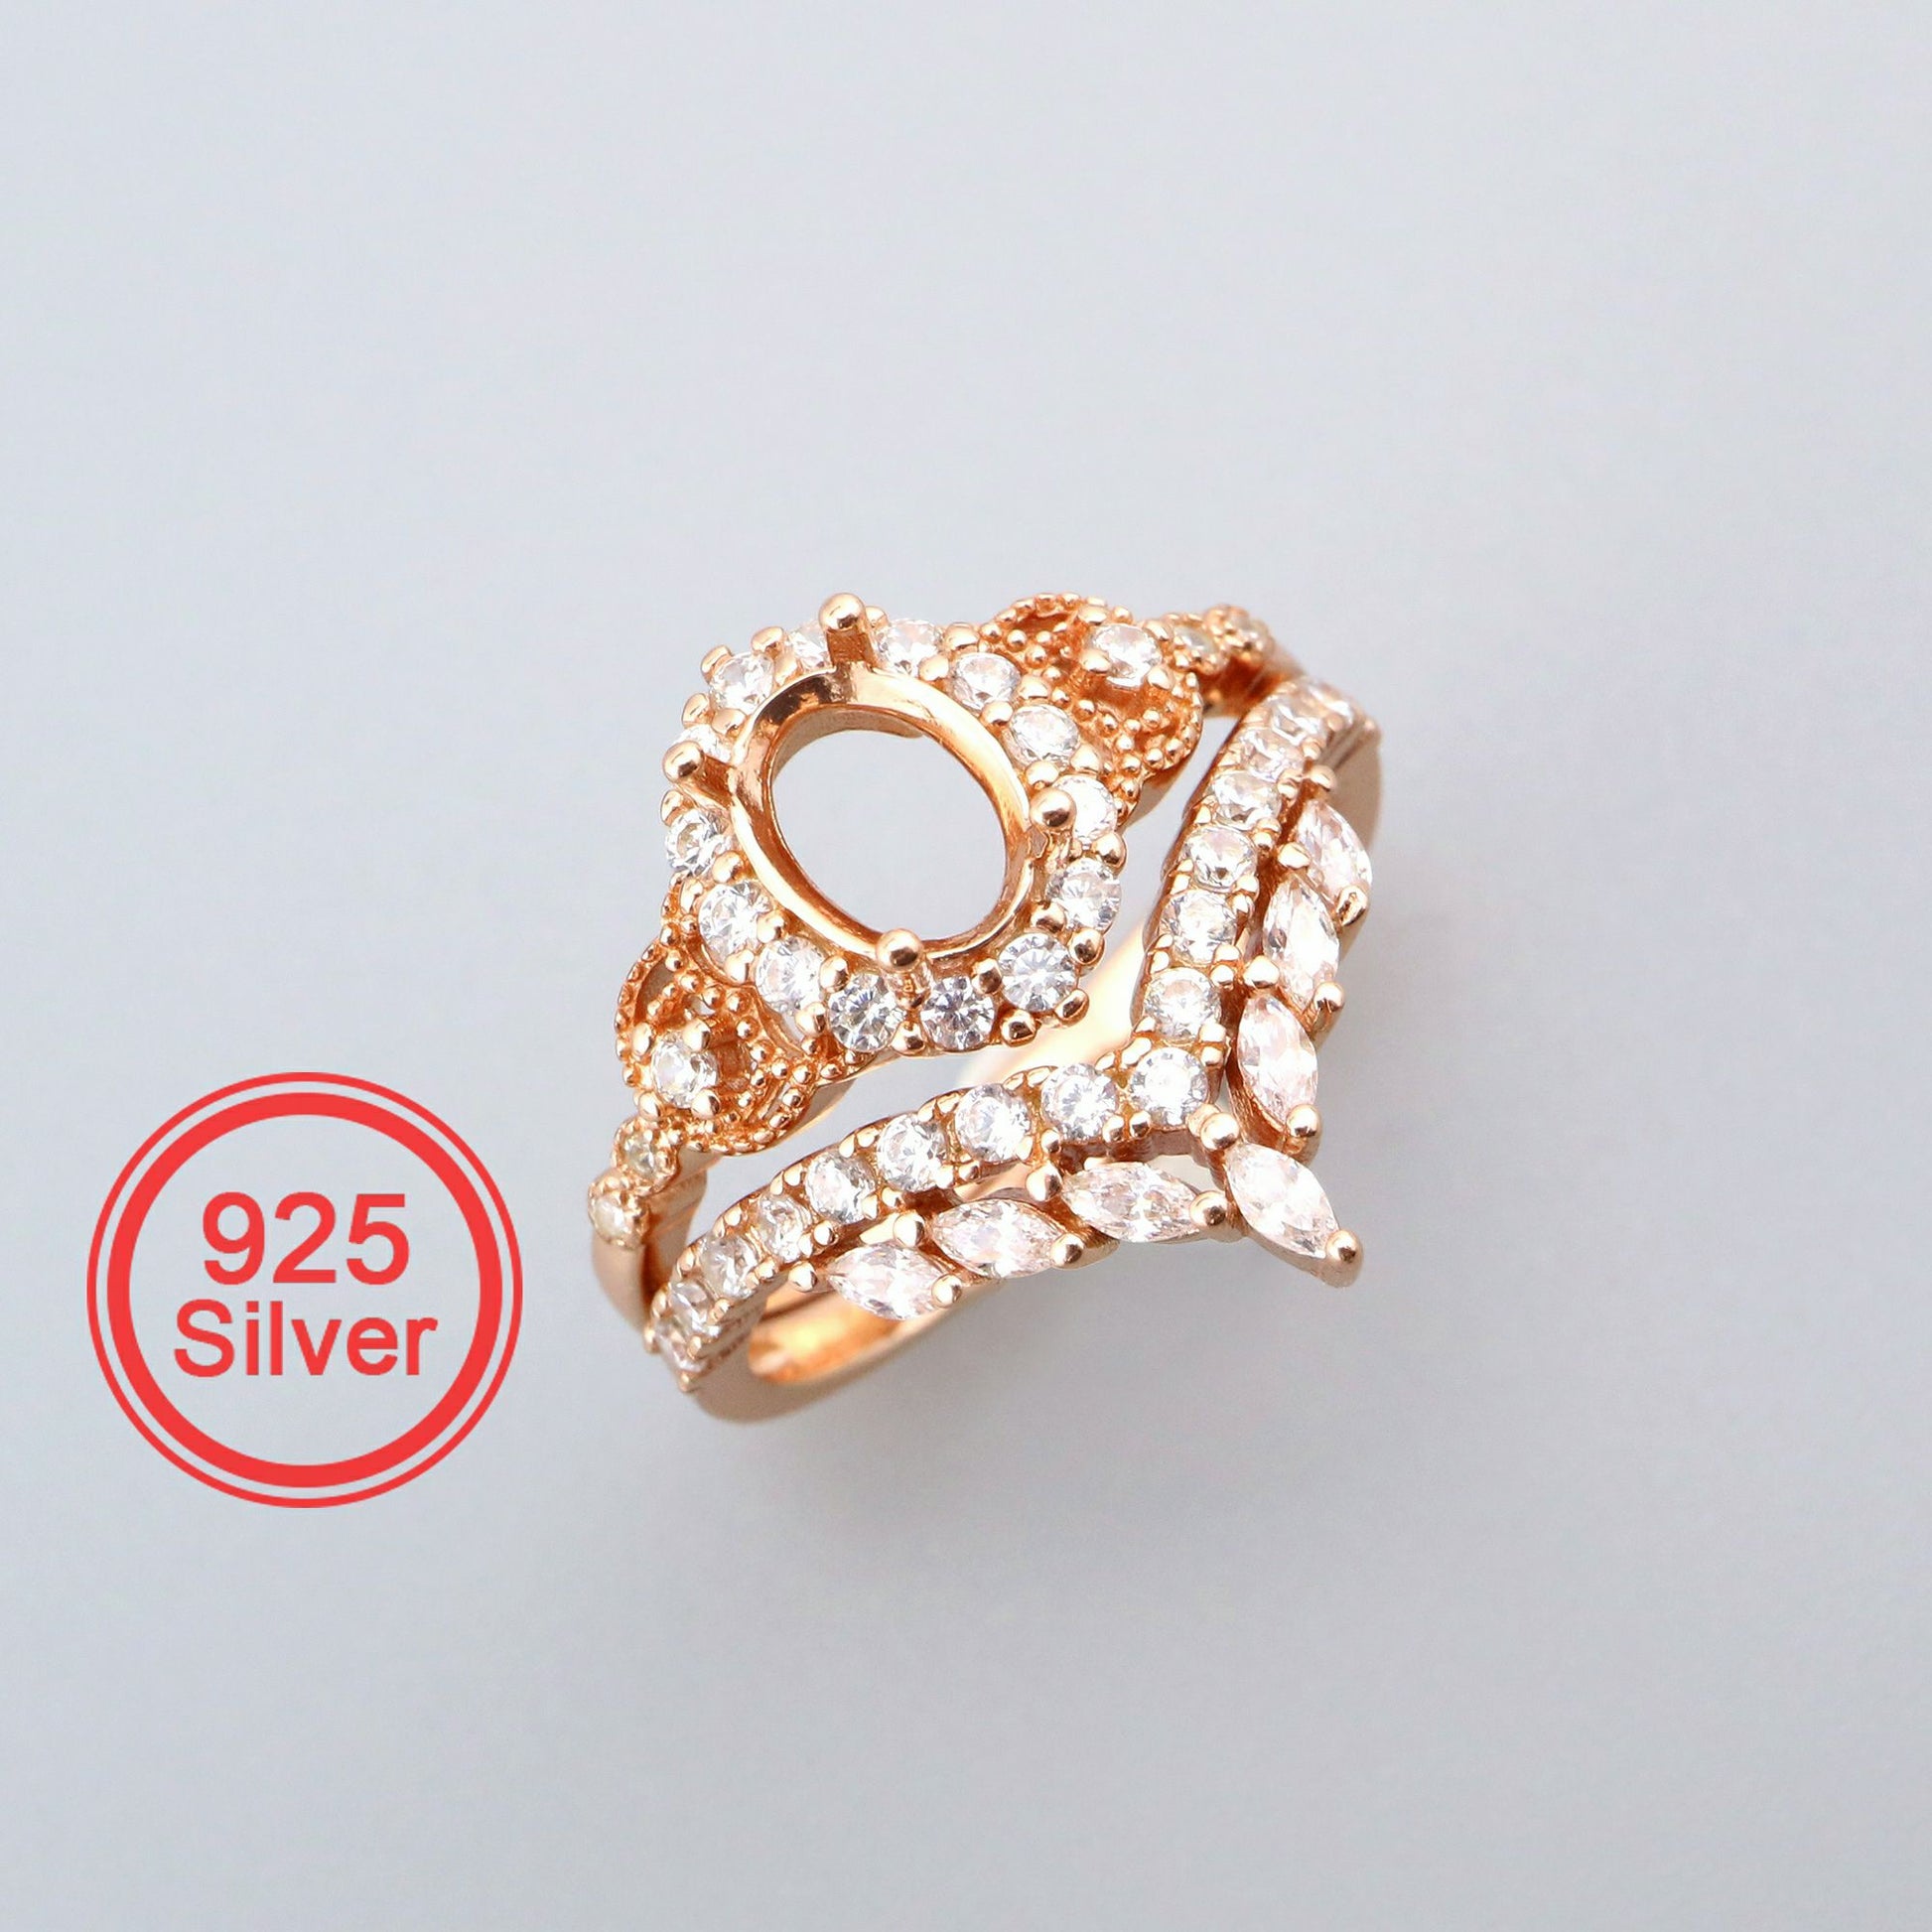 A rose gold oval halo with extra detail and a matching chevron wedding ring.